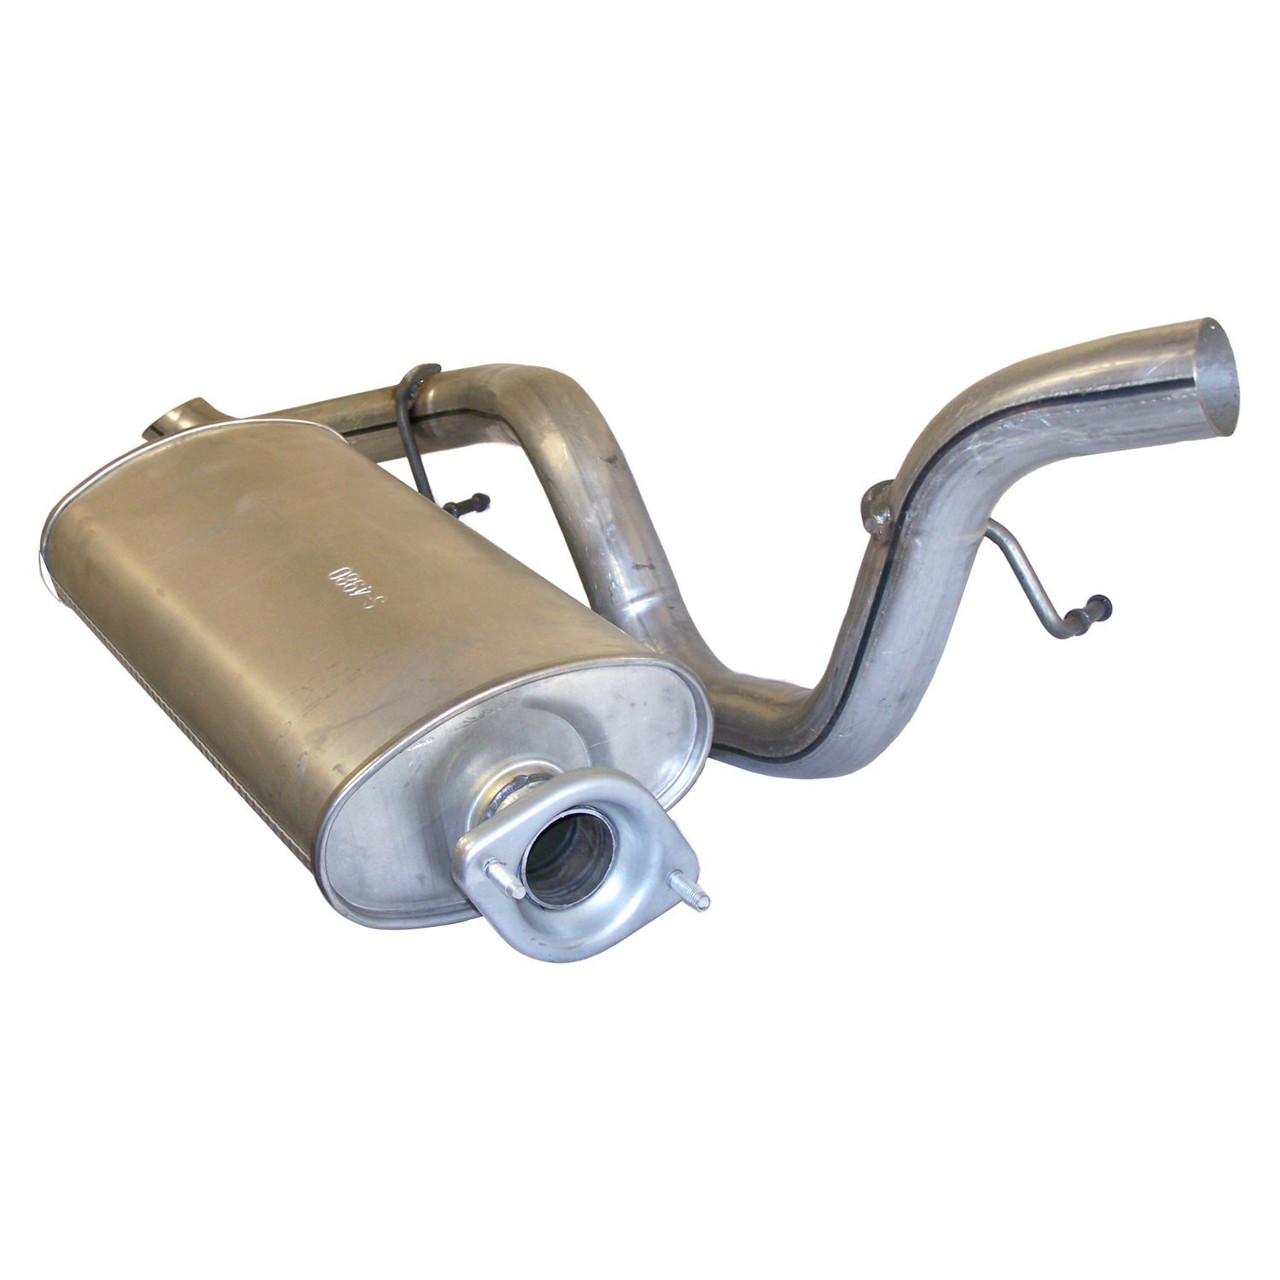 Buy Muffler & Tailpipe for Select 2000-2006 Jeep TJ Wrangler w/  or   Engines 52019241AF-CA Crown Automotive at JeepHut Off-Road